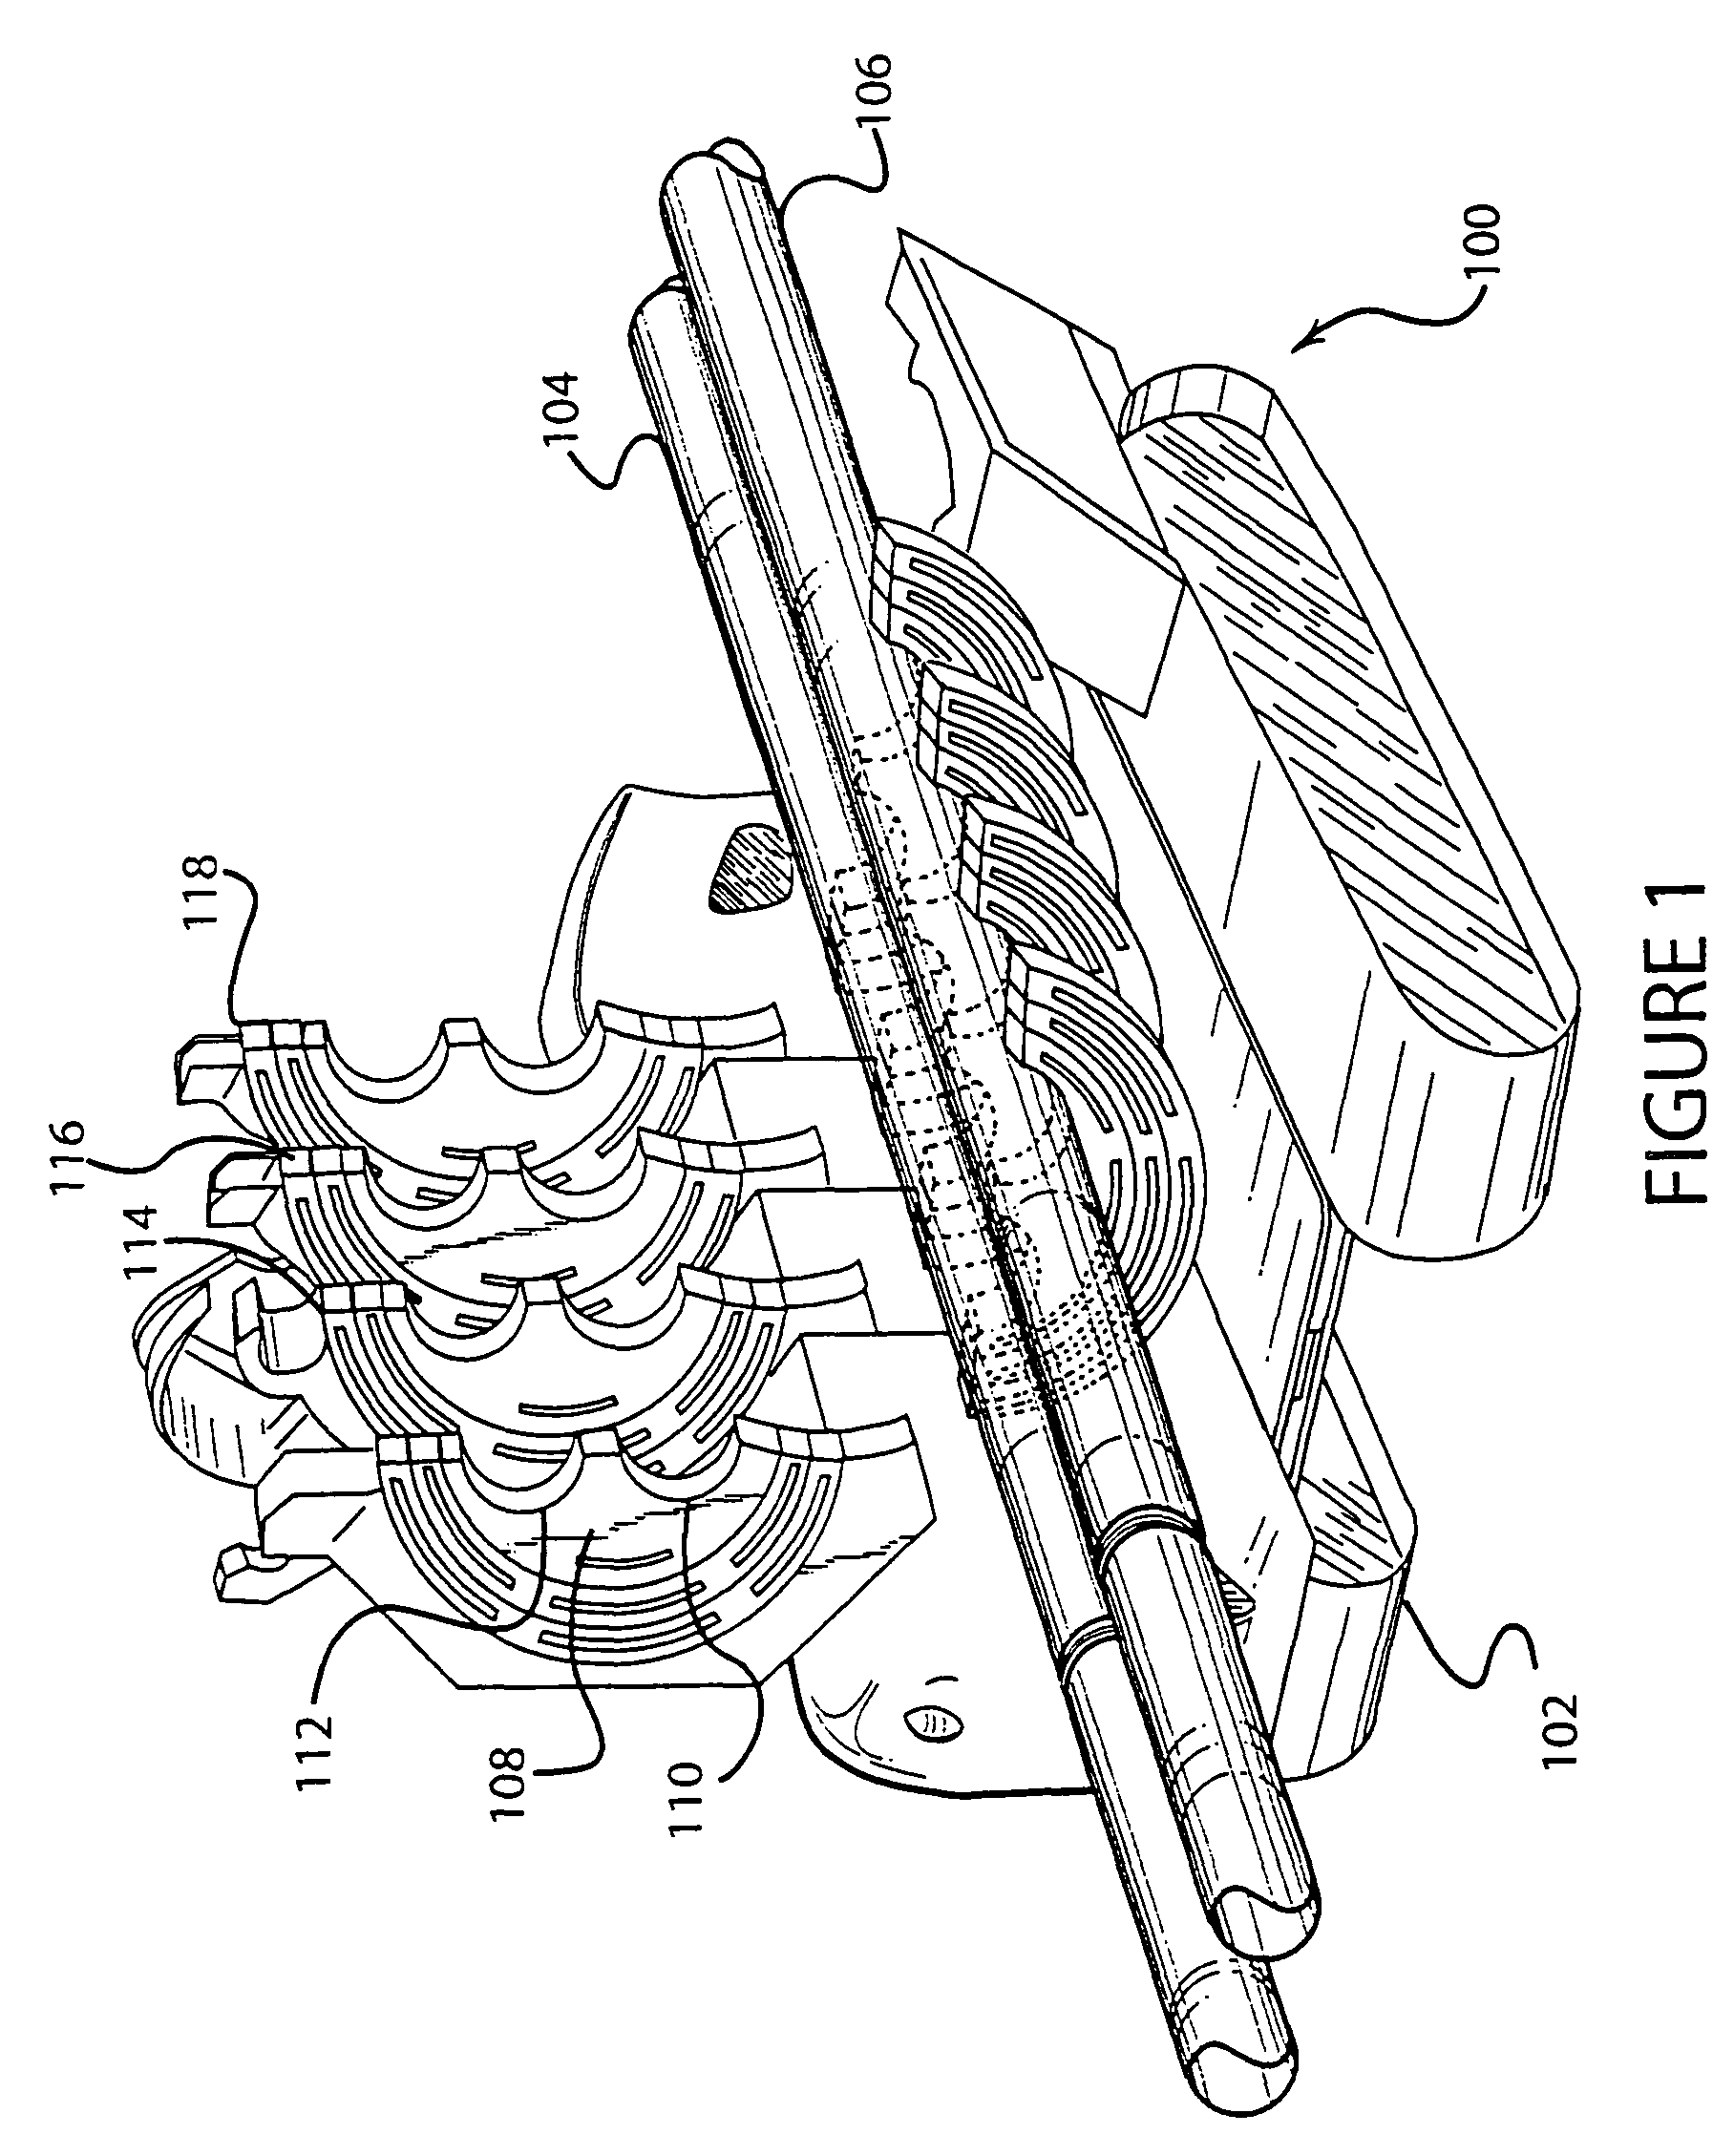 Pipe welder for simultaneously fusing a plurality of polyethylene pipes